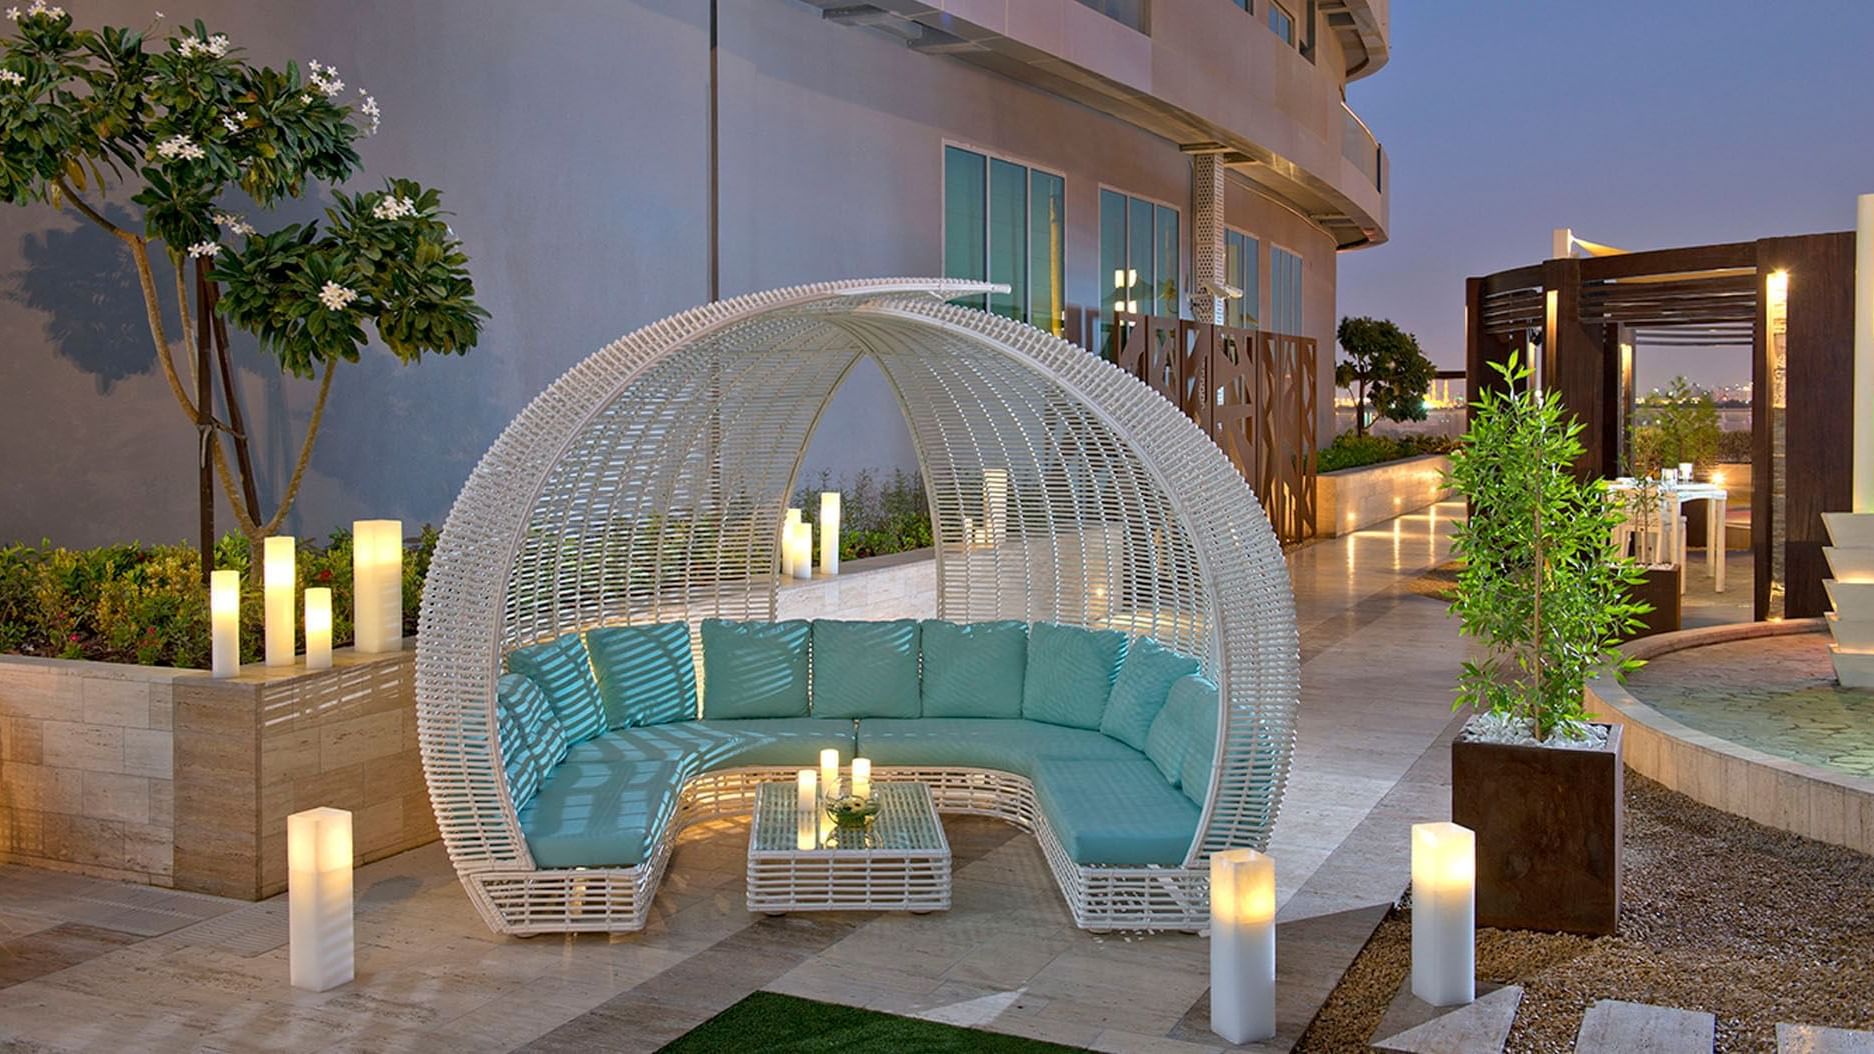 A patio with a white wicker couch and a blue cushion creates a cozy outdoor seating area at DAMAC Maison Dubai Mall Street